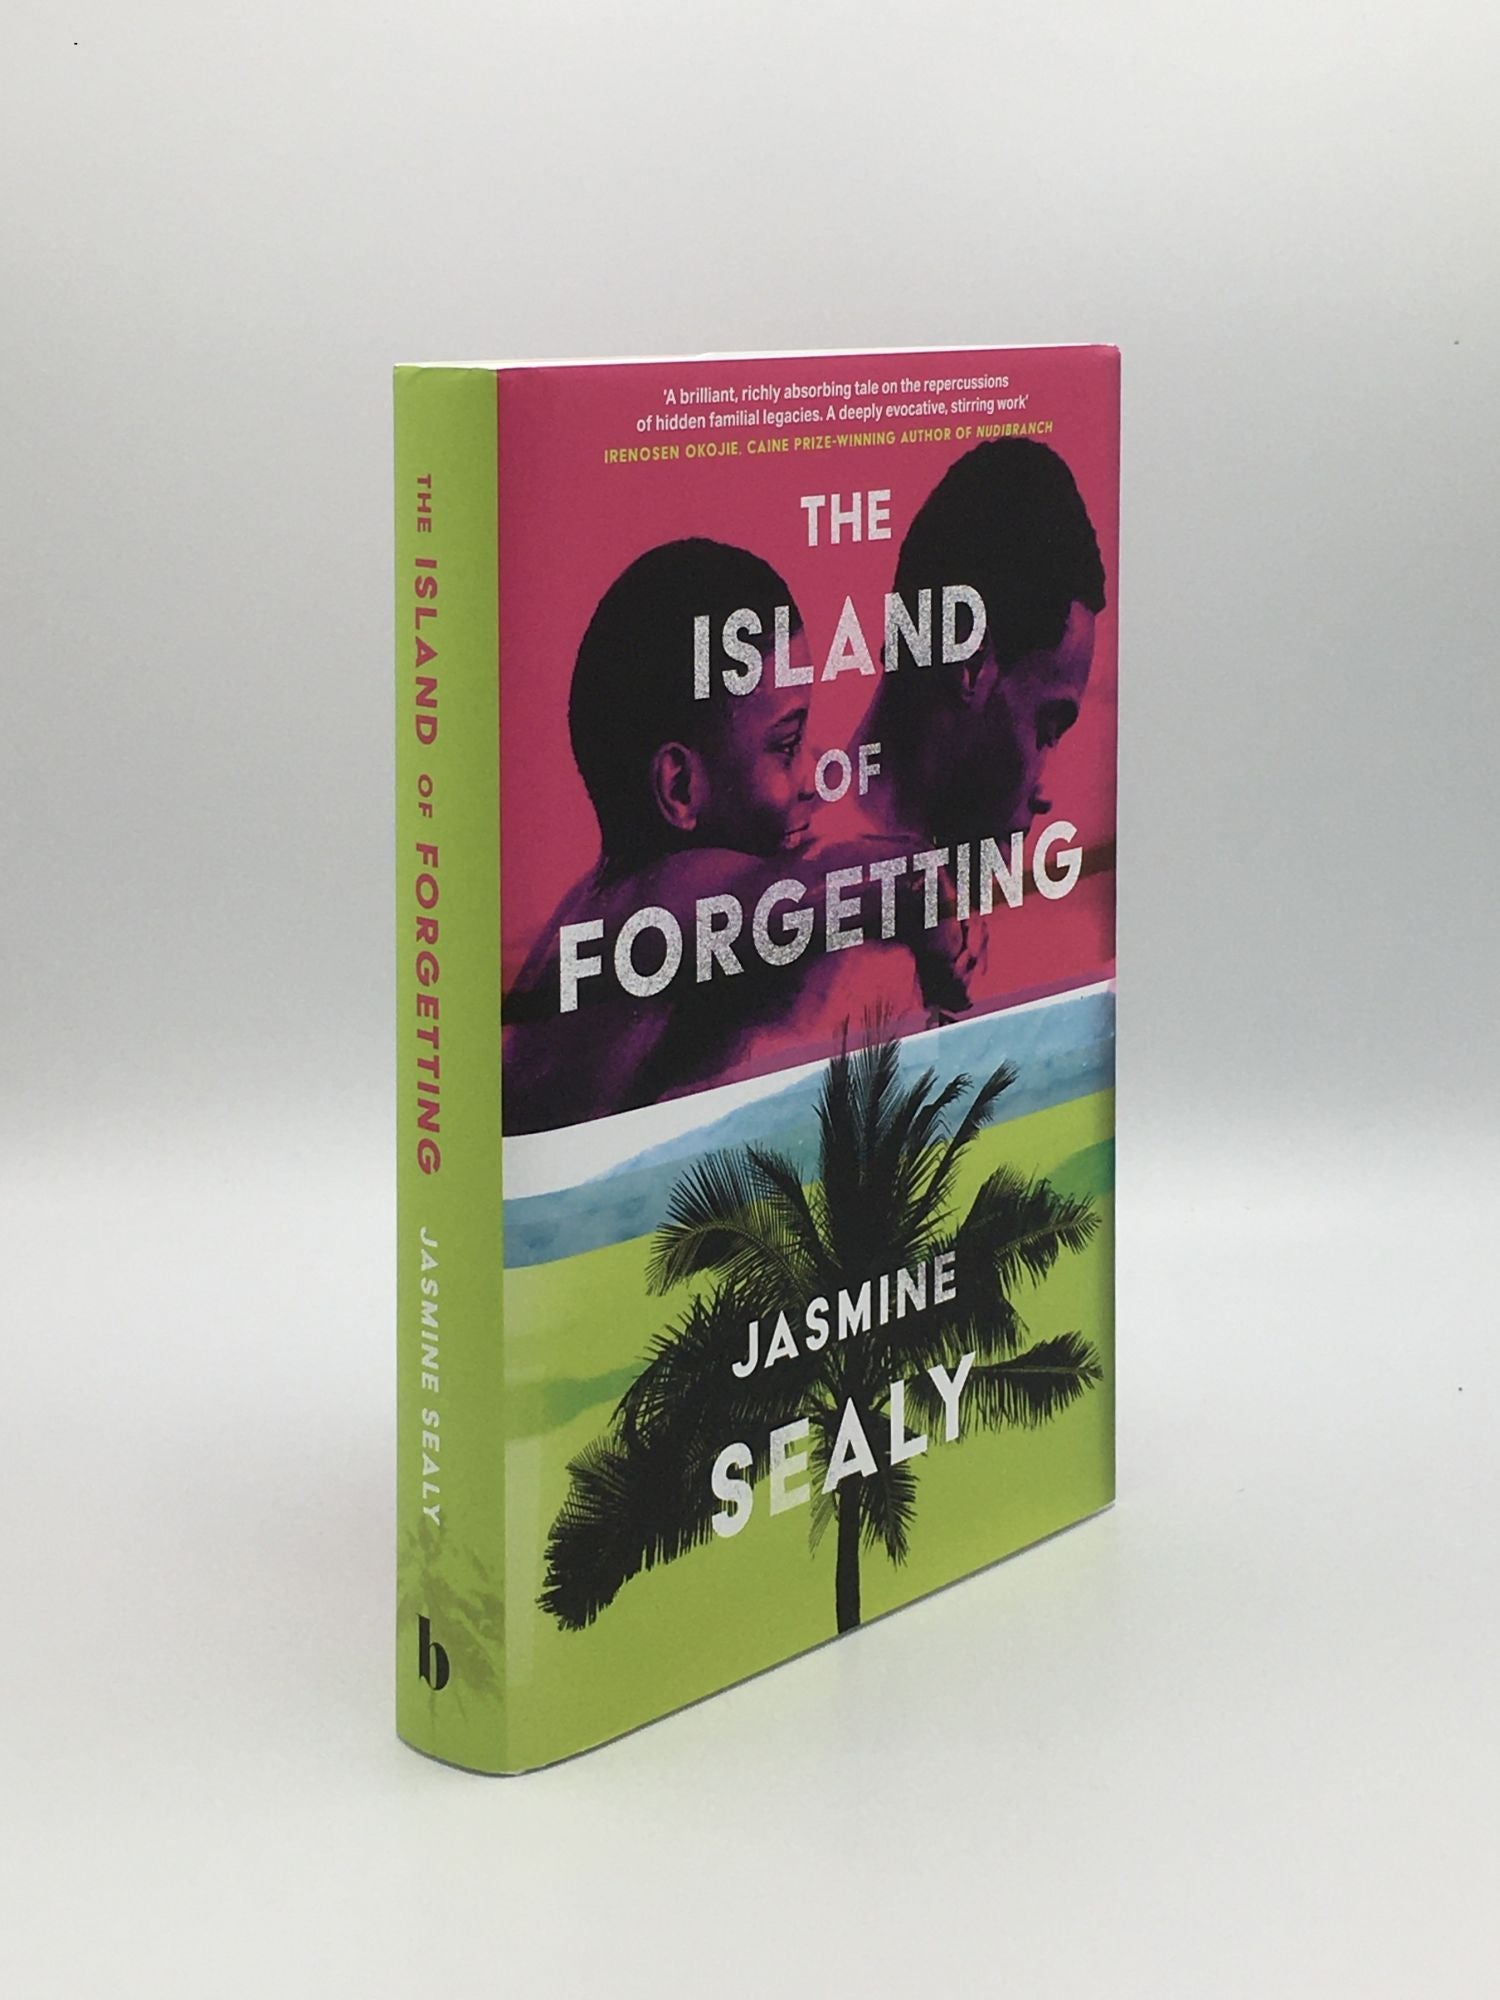 SEALY Jasmine - The Island of Forgetting